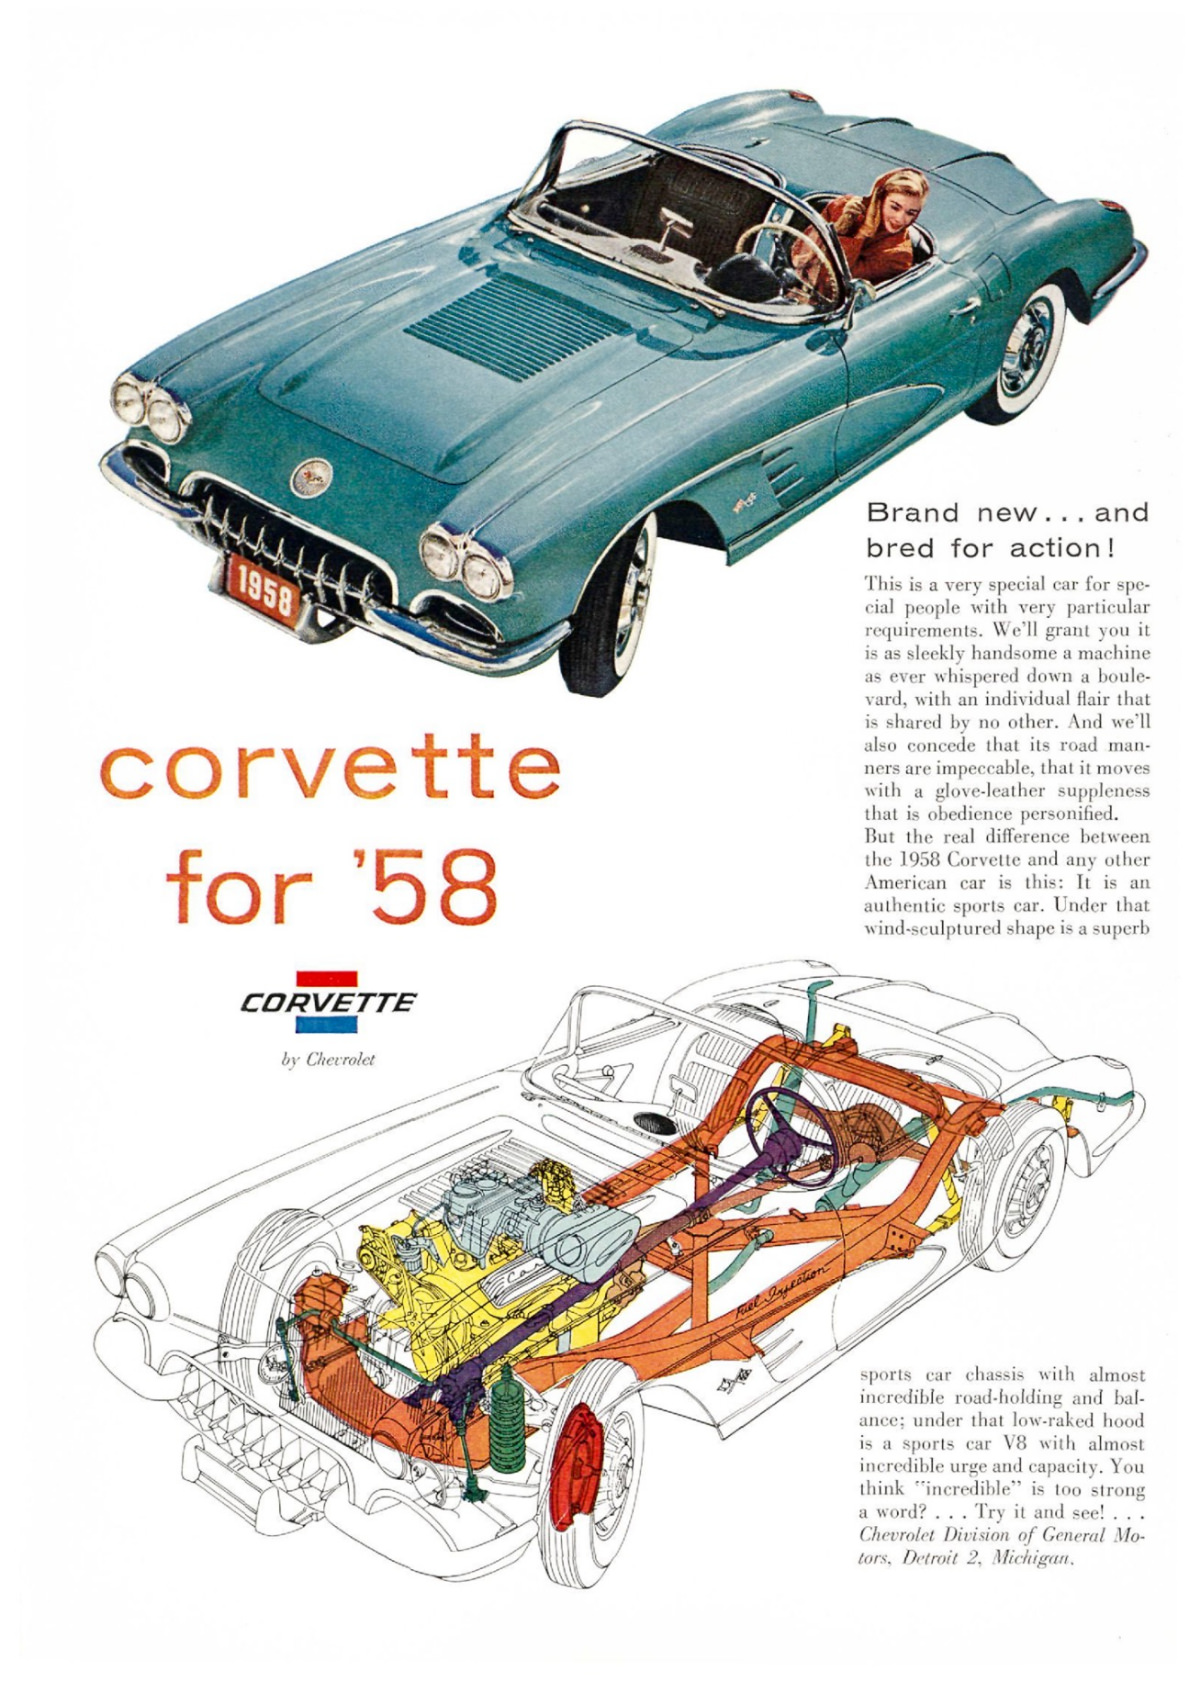 Vintage Ads for the Chevrolet Corvette (C1) From the 1950s